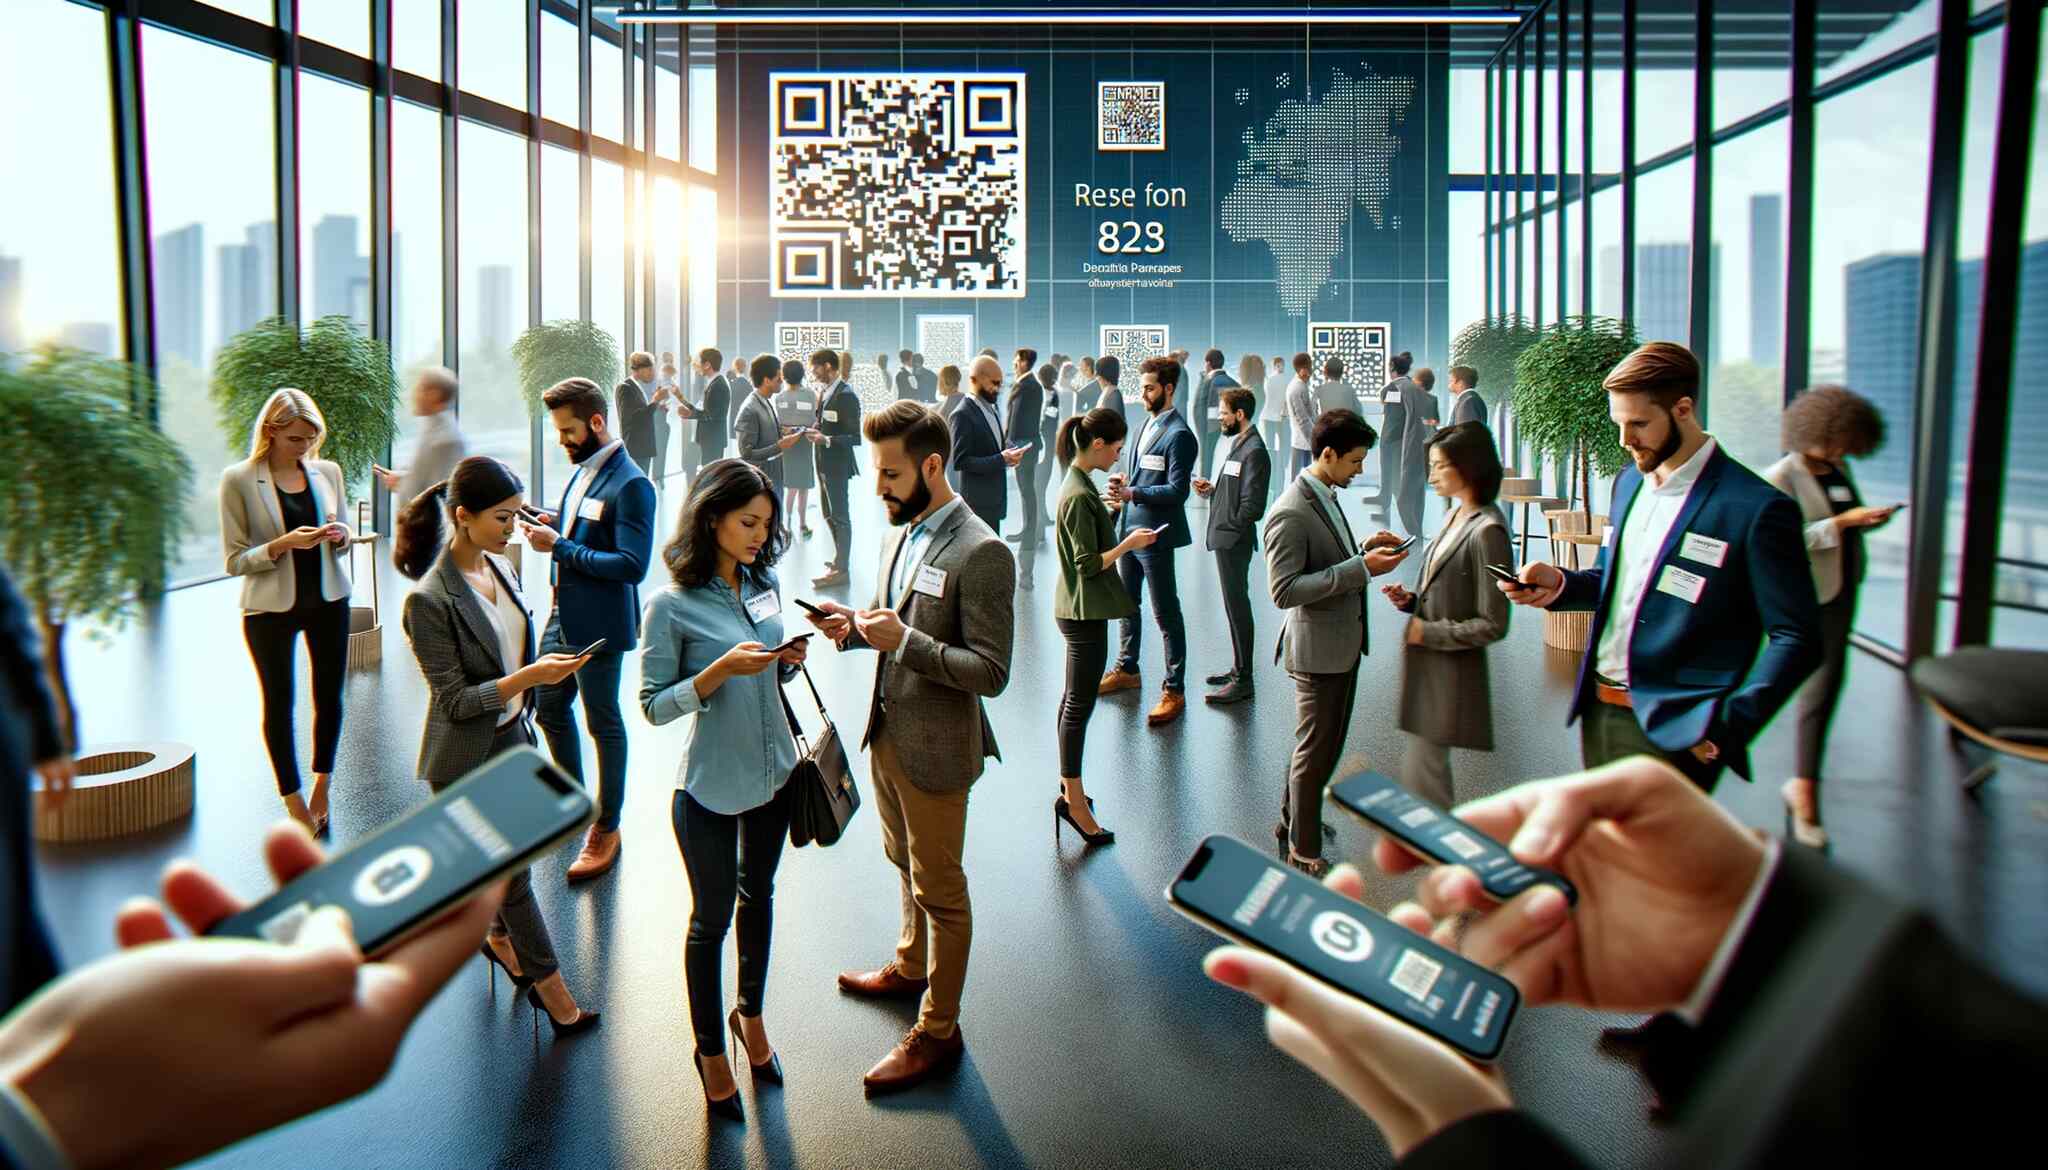 A networking event where professionals are exchanging digital business cards using their smartphones